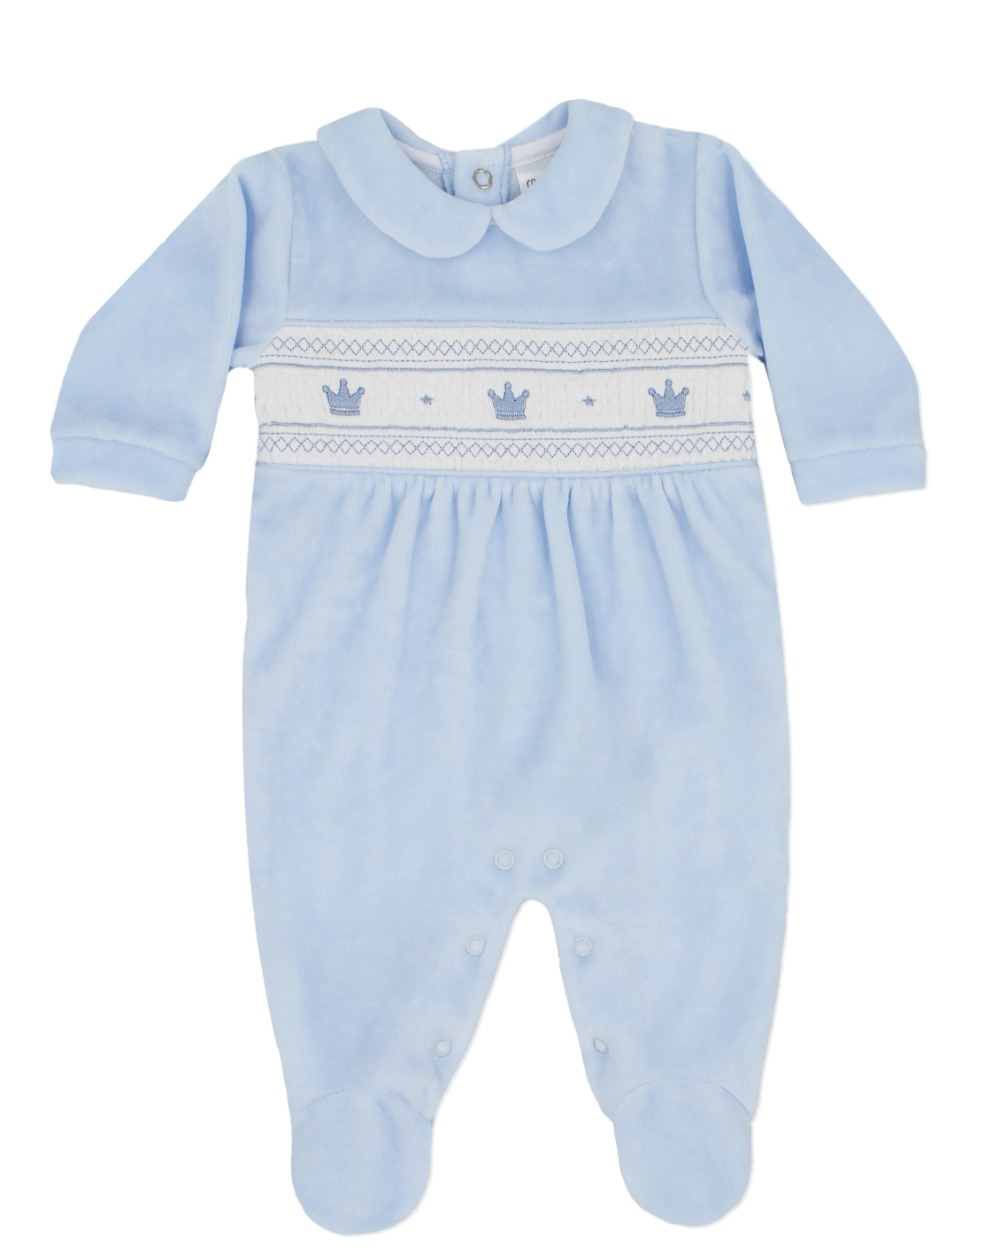 Blue baby prince outfit 